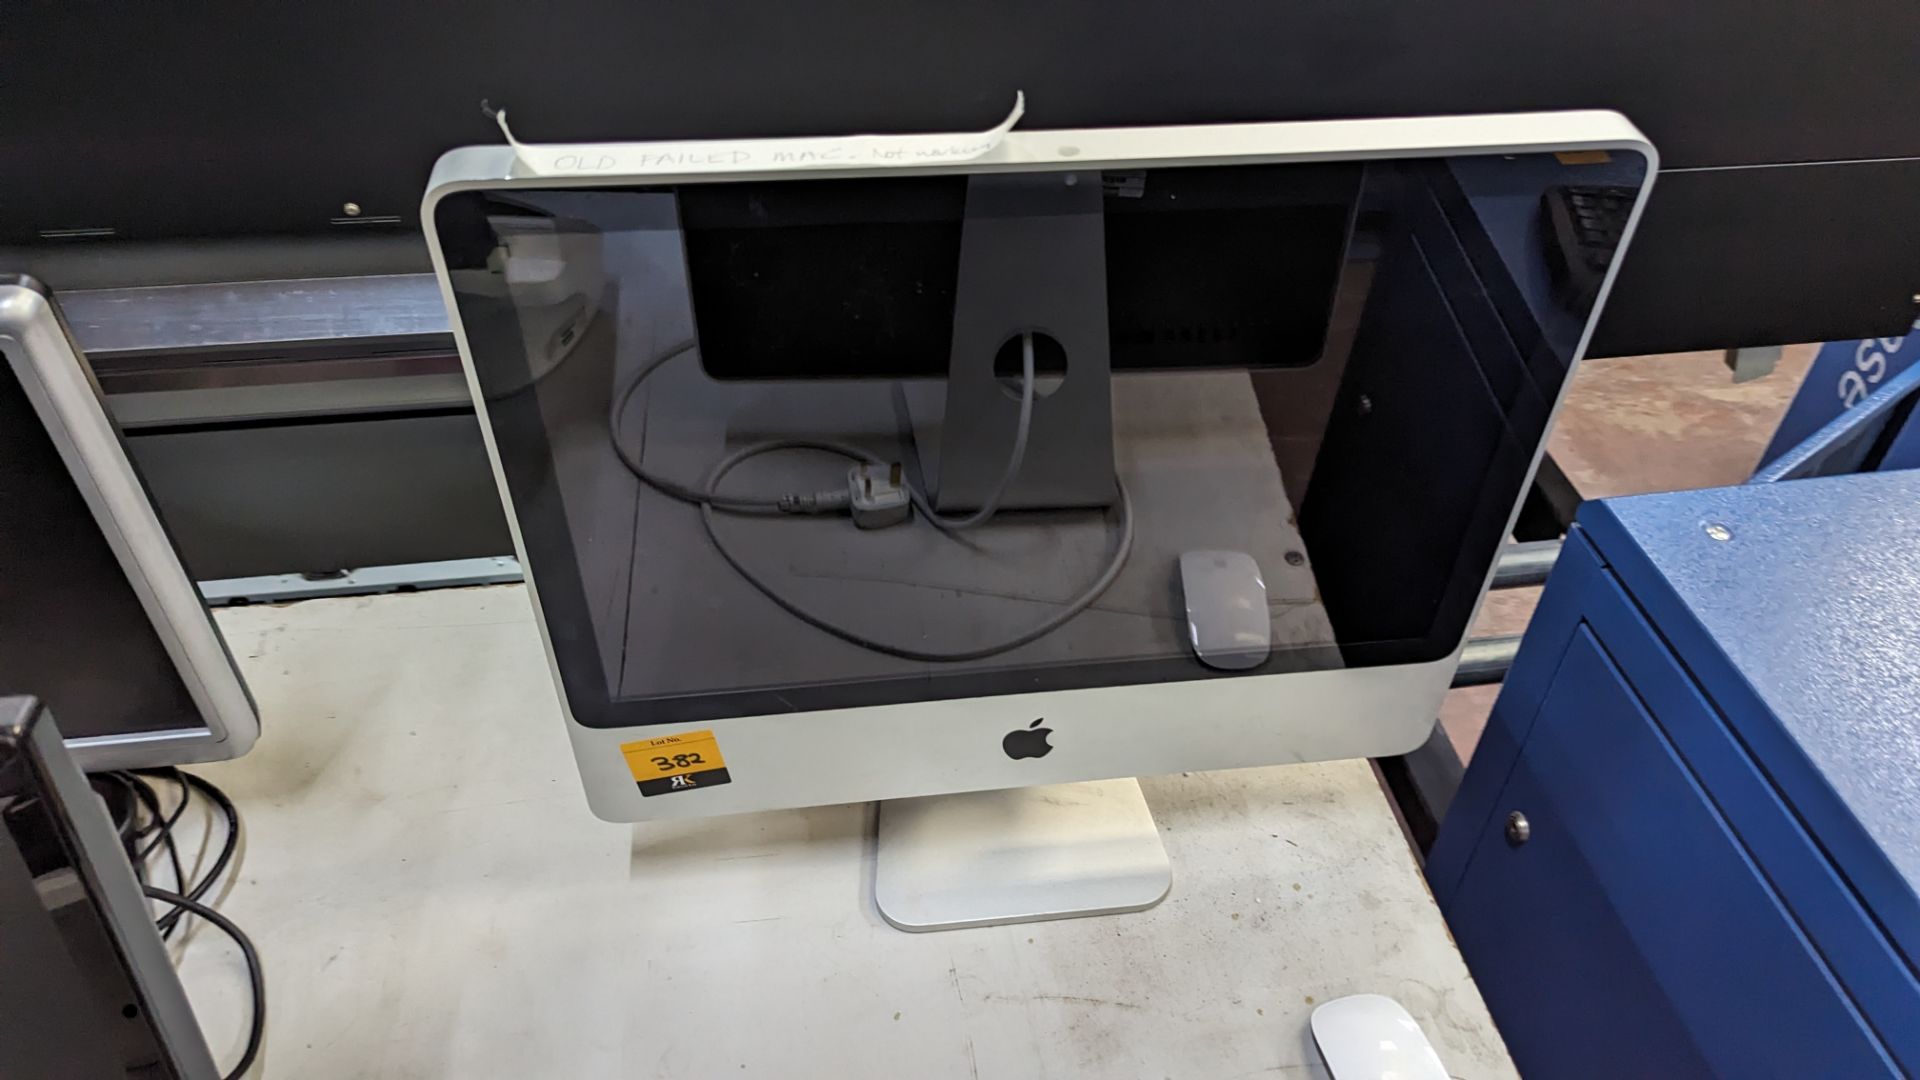 Apple iMac computer model A1224 EMC 2210 including mouse but no keyboard. NB not working - Image 2 of 7